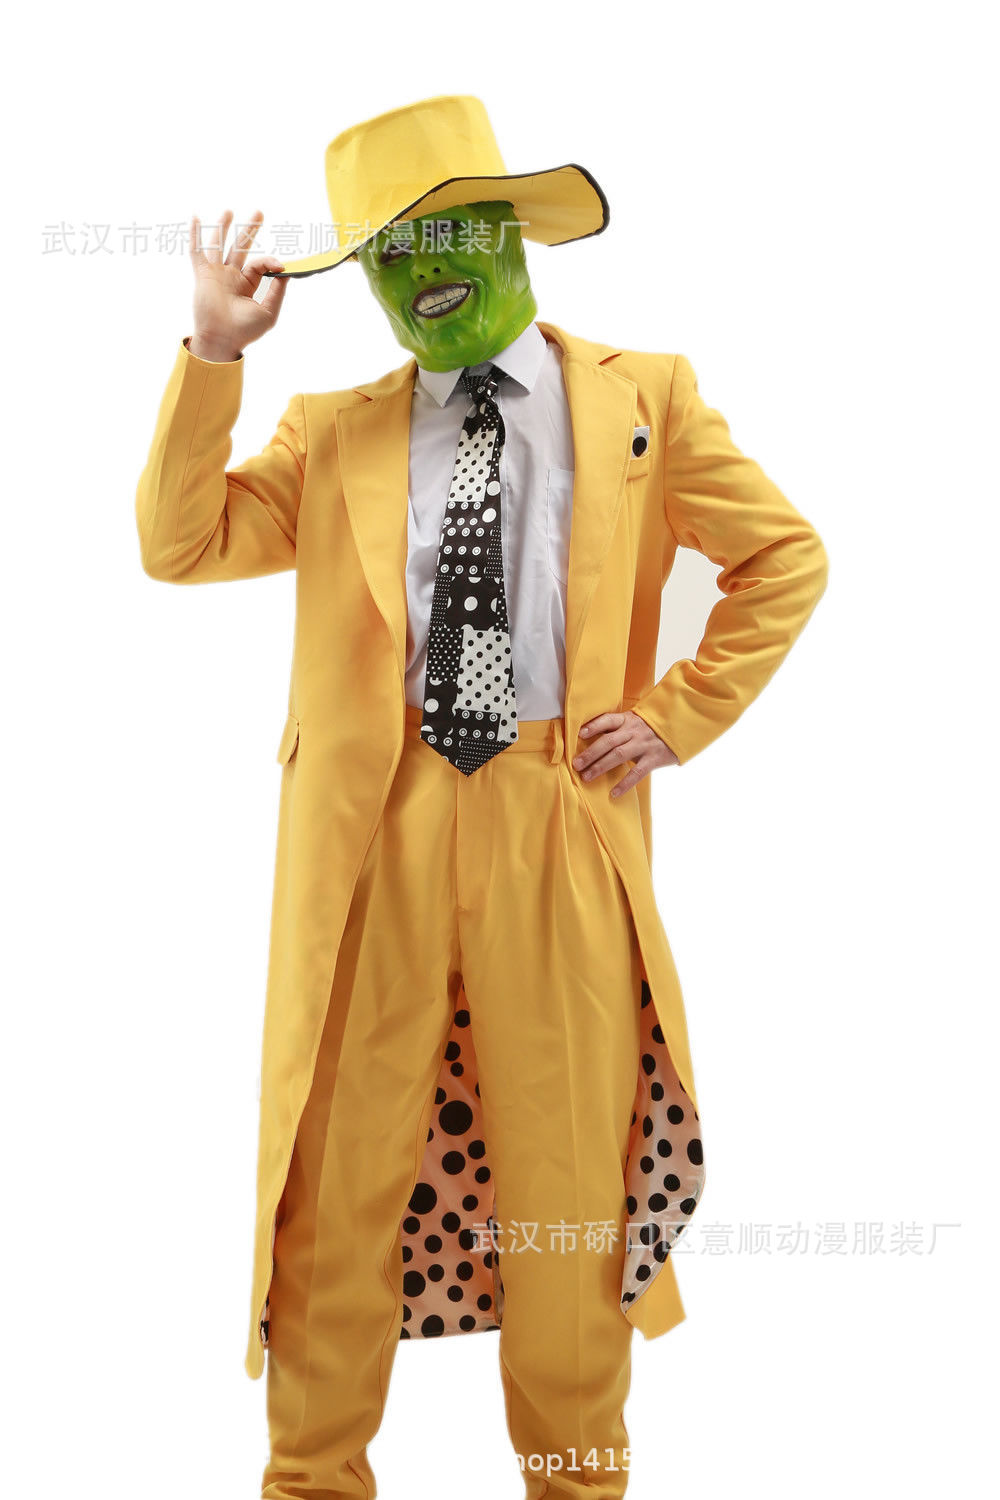 Mask Yellow Suits Cosplay Costumes Jim Carrey Jacket Uniform Adult Women Outfit